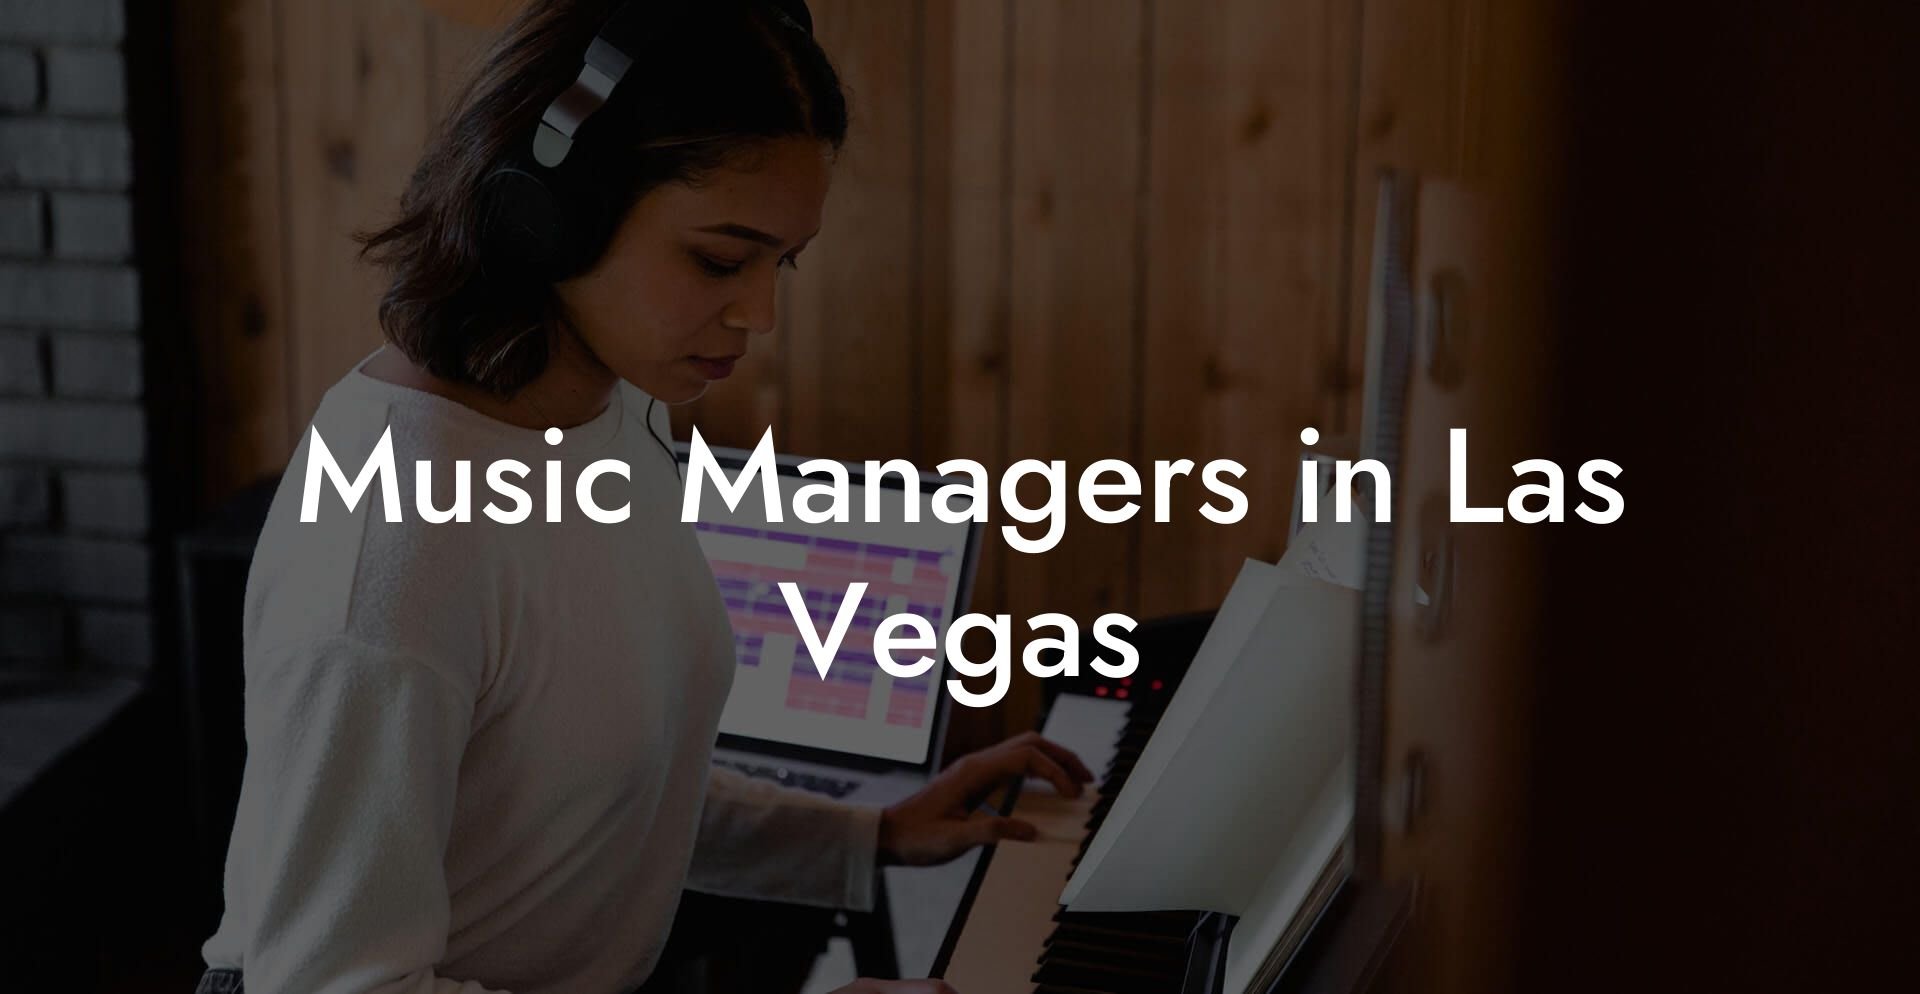 Music Managers in Las Vegas